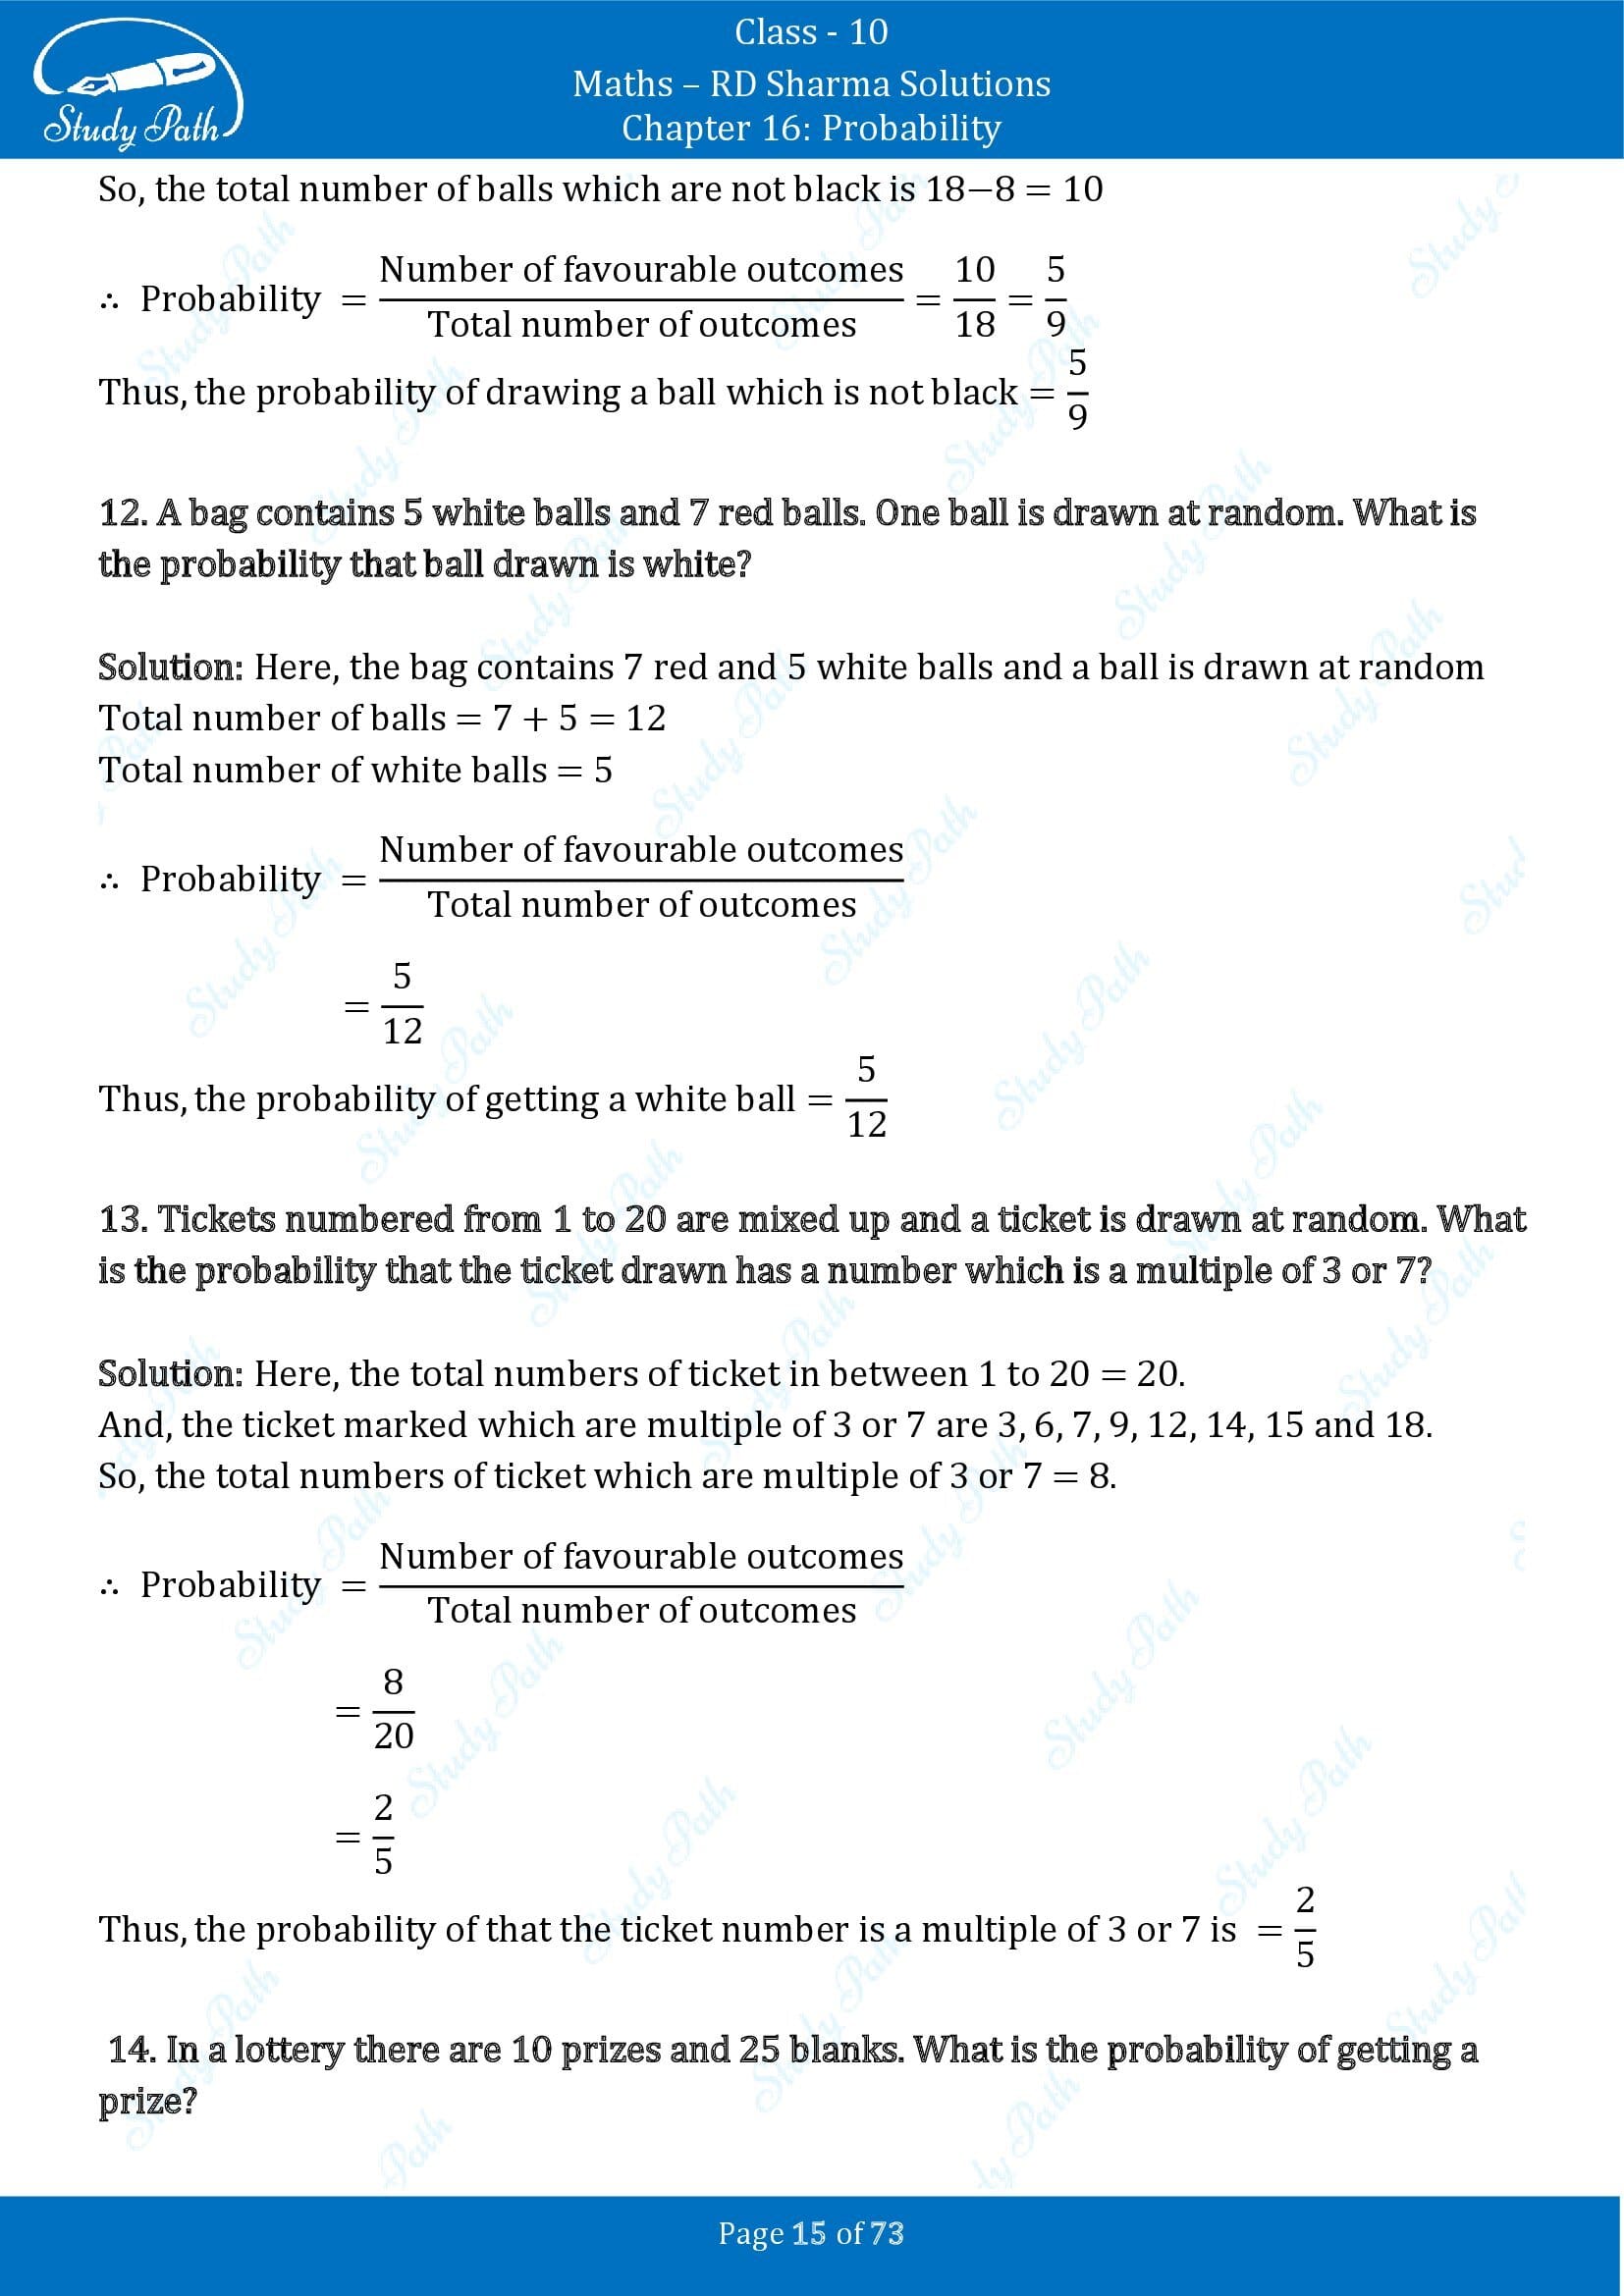 RD Sharma Solutions Class 10 Chapter 16 Probability Exercise 16.1 00015